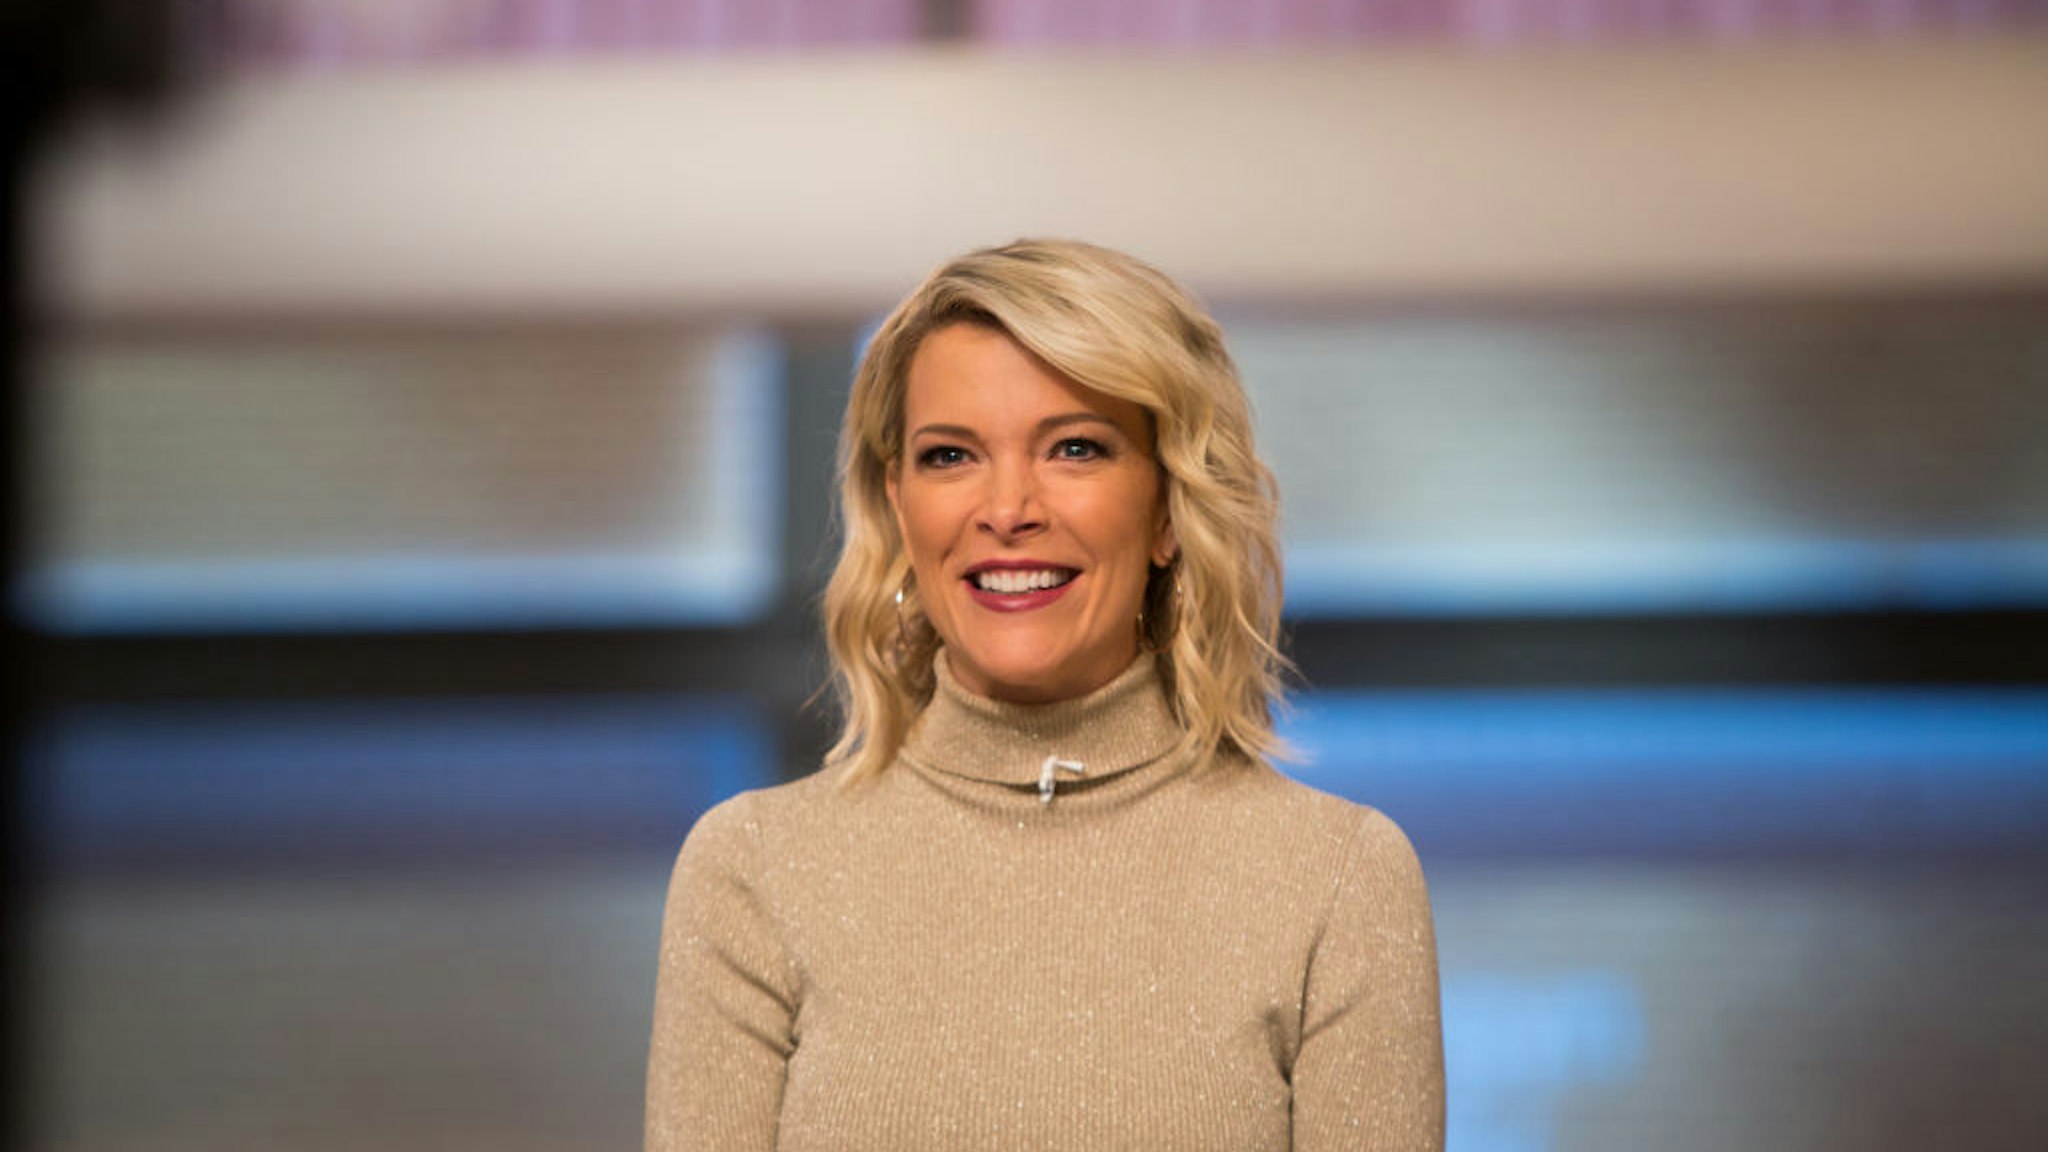 MEGYN KELLY TODAY -- Pictured: Megyn Kelly on Wednesday, December 20, 2017 -- (Photo by: Nathan Congleton/NBCU Photo Bank/NBCUniversal via Getty Images via Getty Images)